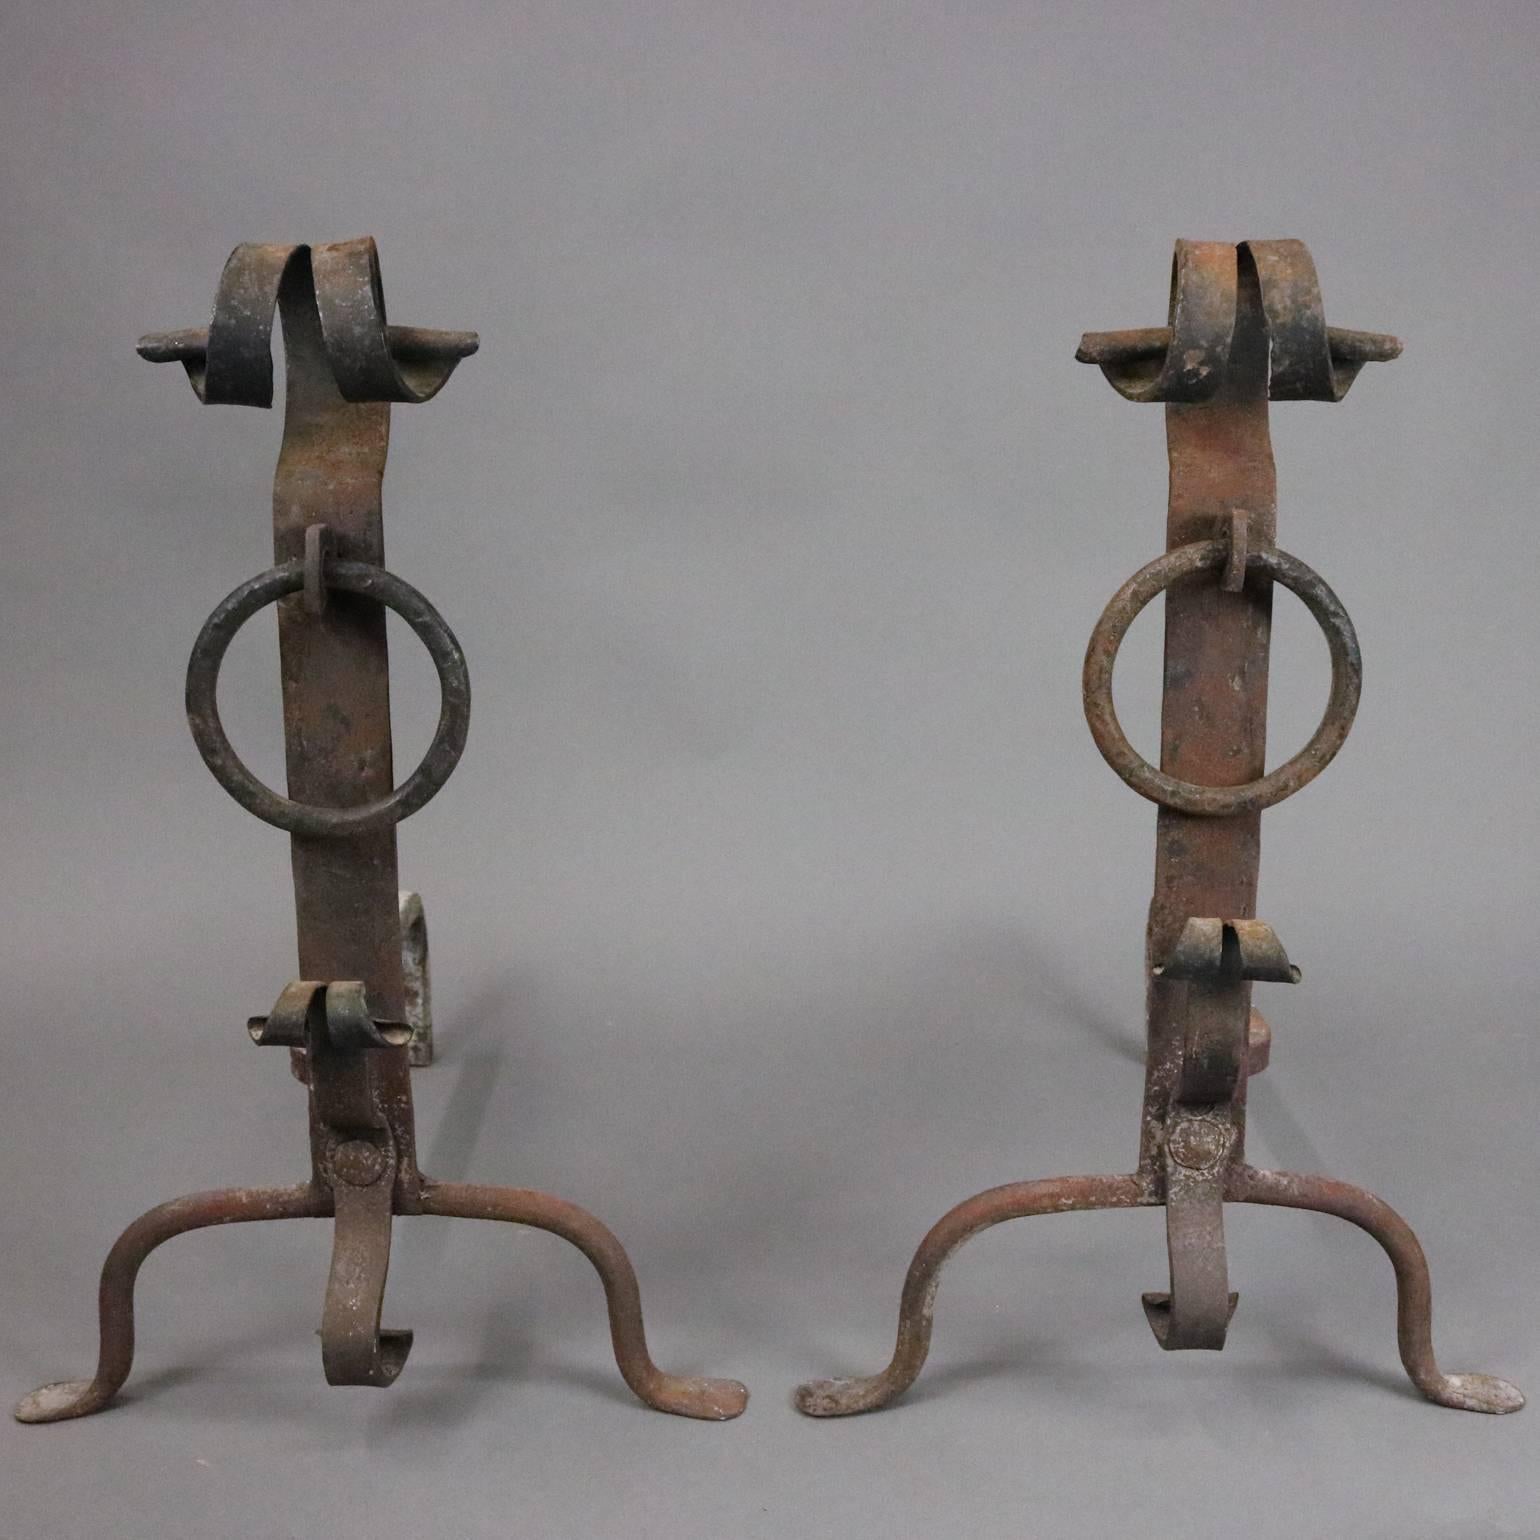 Pair antique Old World England hand-forged wrought iron fireplace andirons feature divided curled finial, shaft ring, curled or scrolled base decoration, seated on arched legs, circa 1820

Measure: 21" H x 13.5" W x 18.5" D.